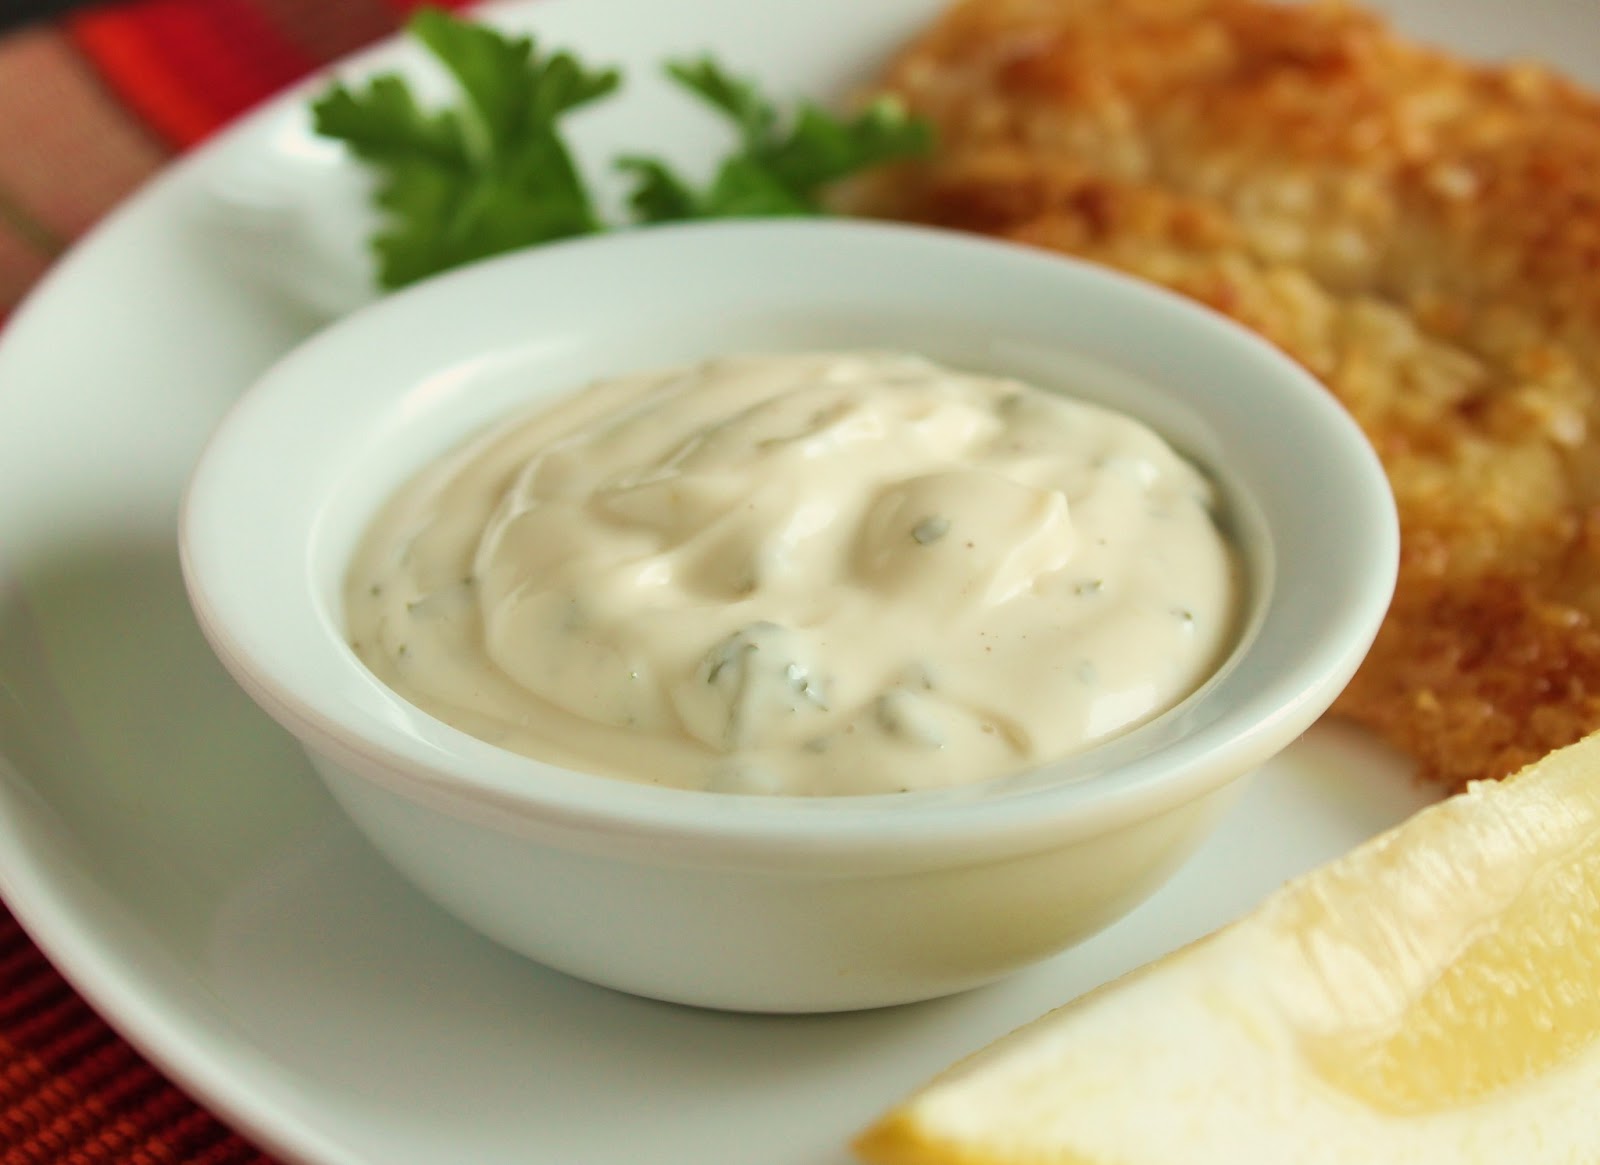 This Overrated/Underrated Food Quiz Will Reveal Something 100% True About You tartar sauce